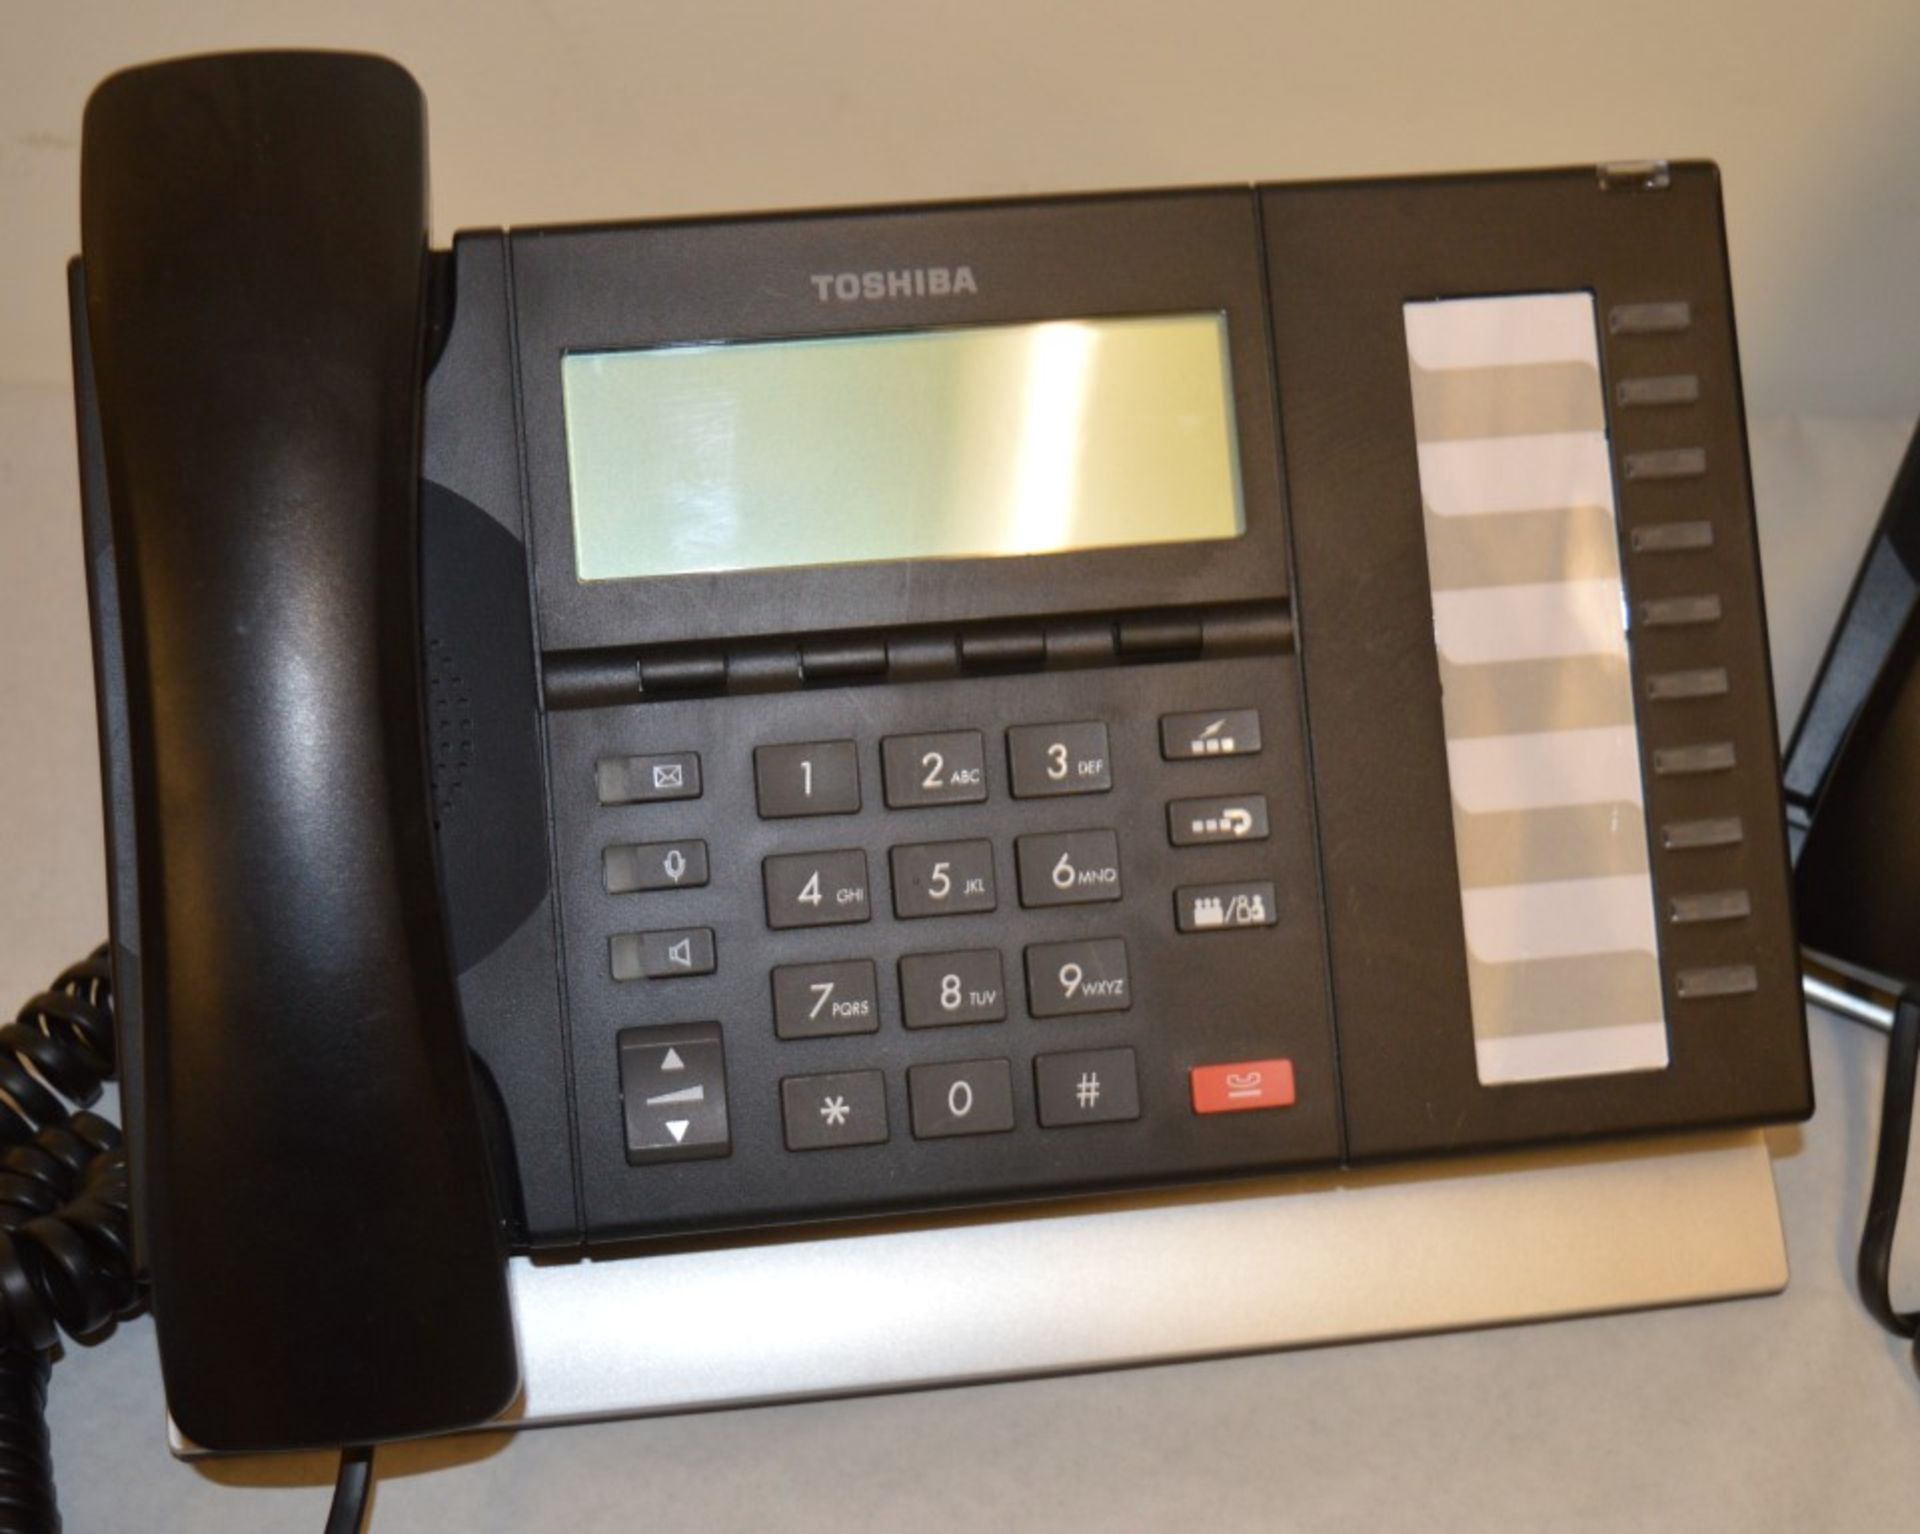 2 x Toshiba Digital Display Hands Free Feature Phones - Professional Office Telephones - Features - Image 2 of 3